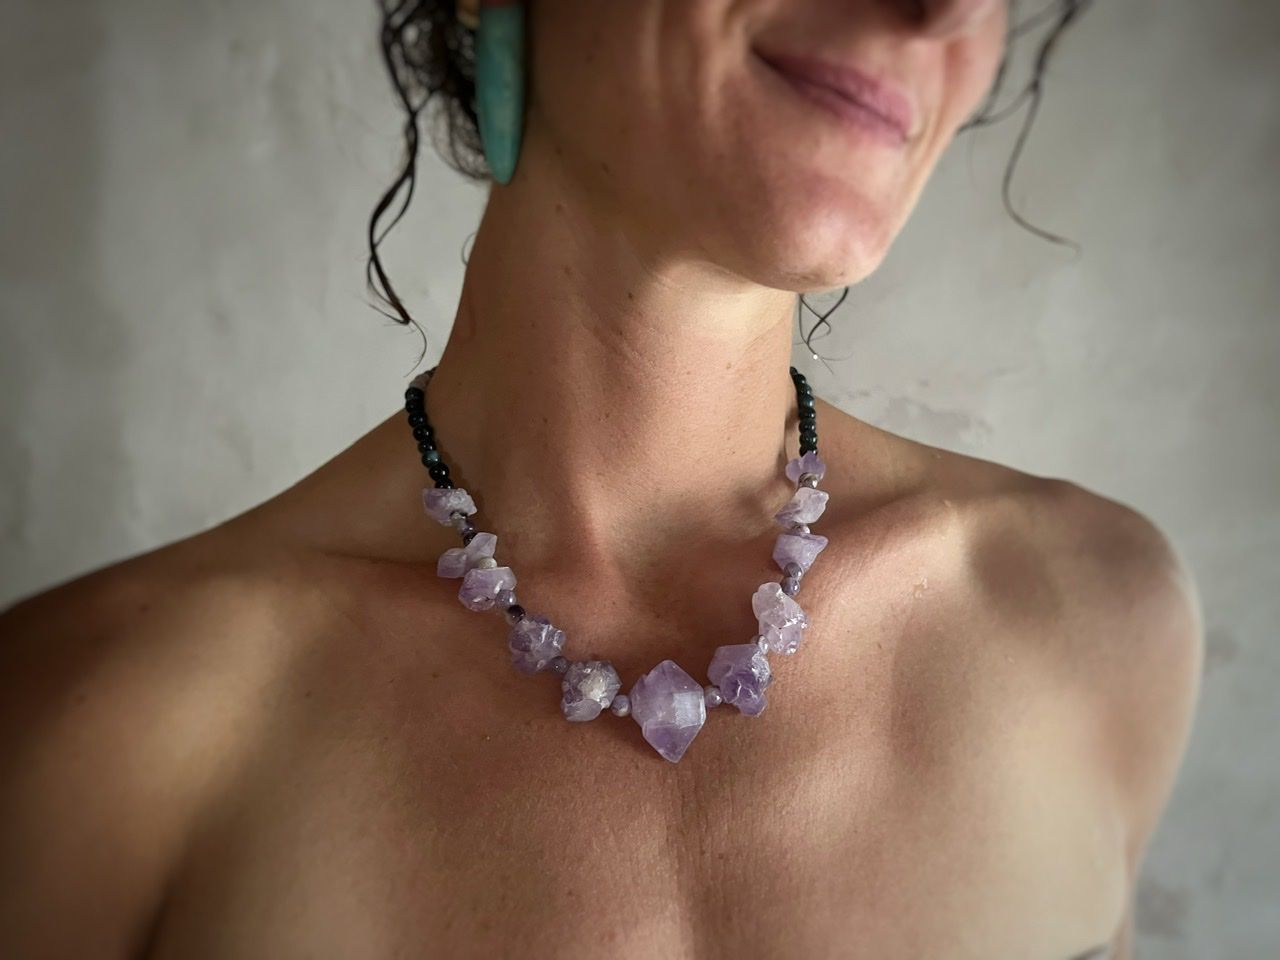 A woman wearing a pale purple top and a short amethyst crystal necklace stands in front of a white mud wall